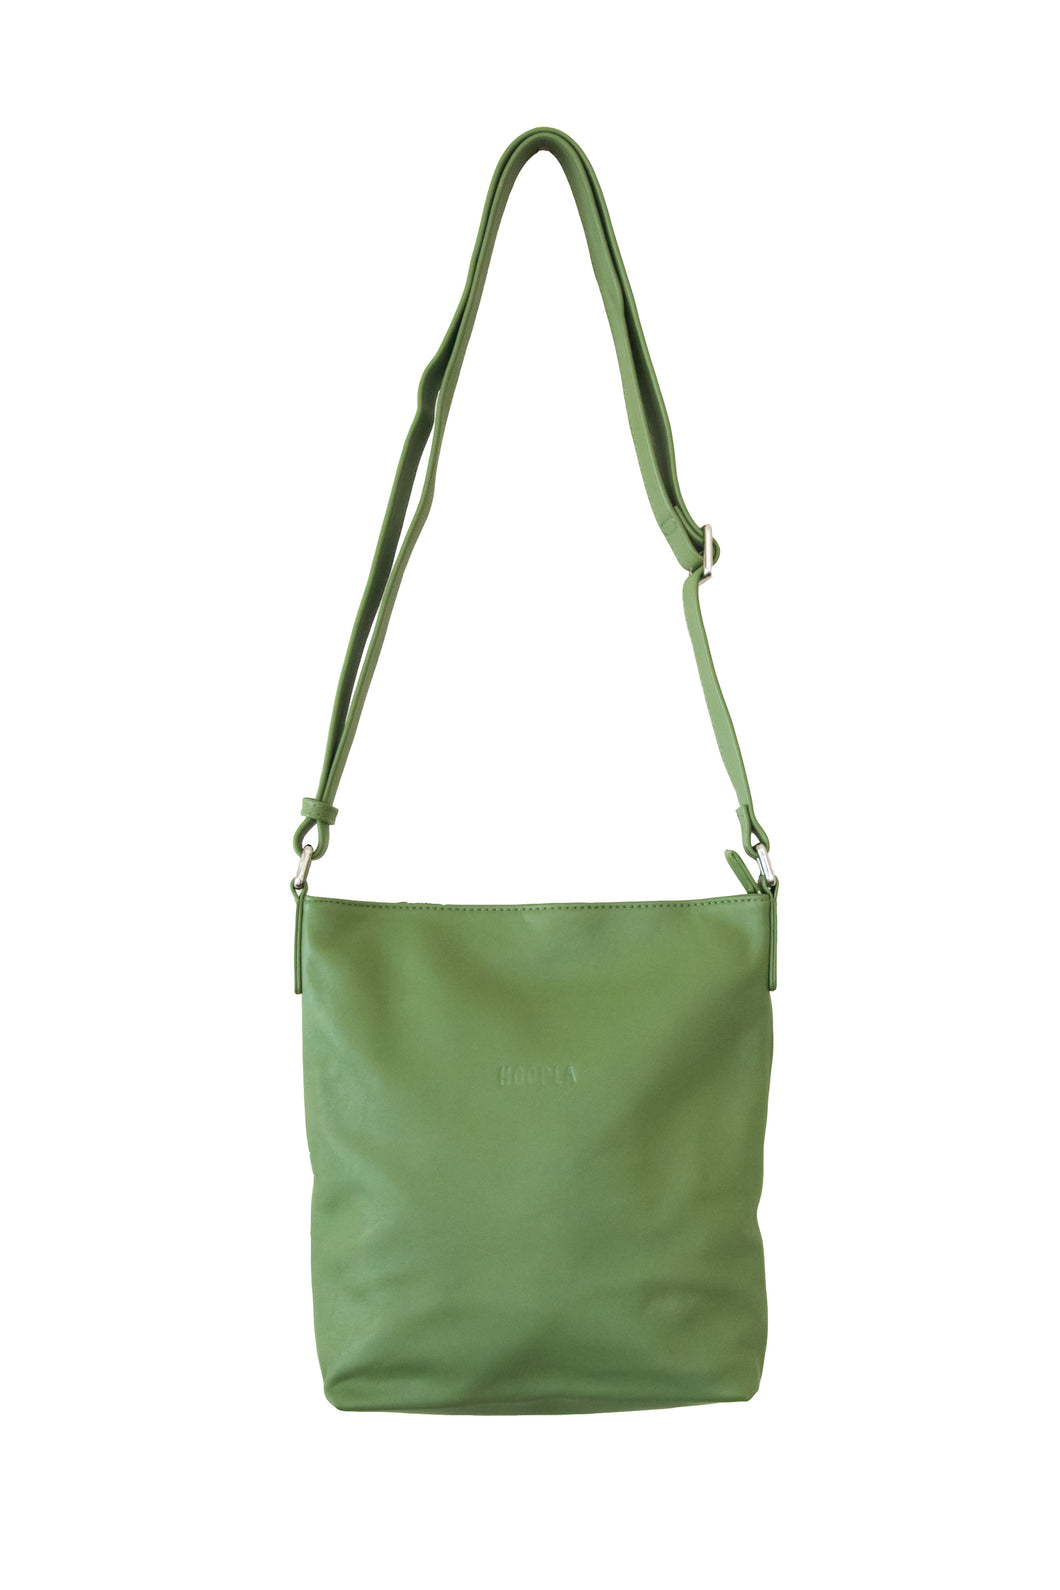 Front view of forest green, buttery soft, cow leather crossbody bag. Silver zip and buckles. 